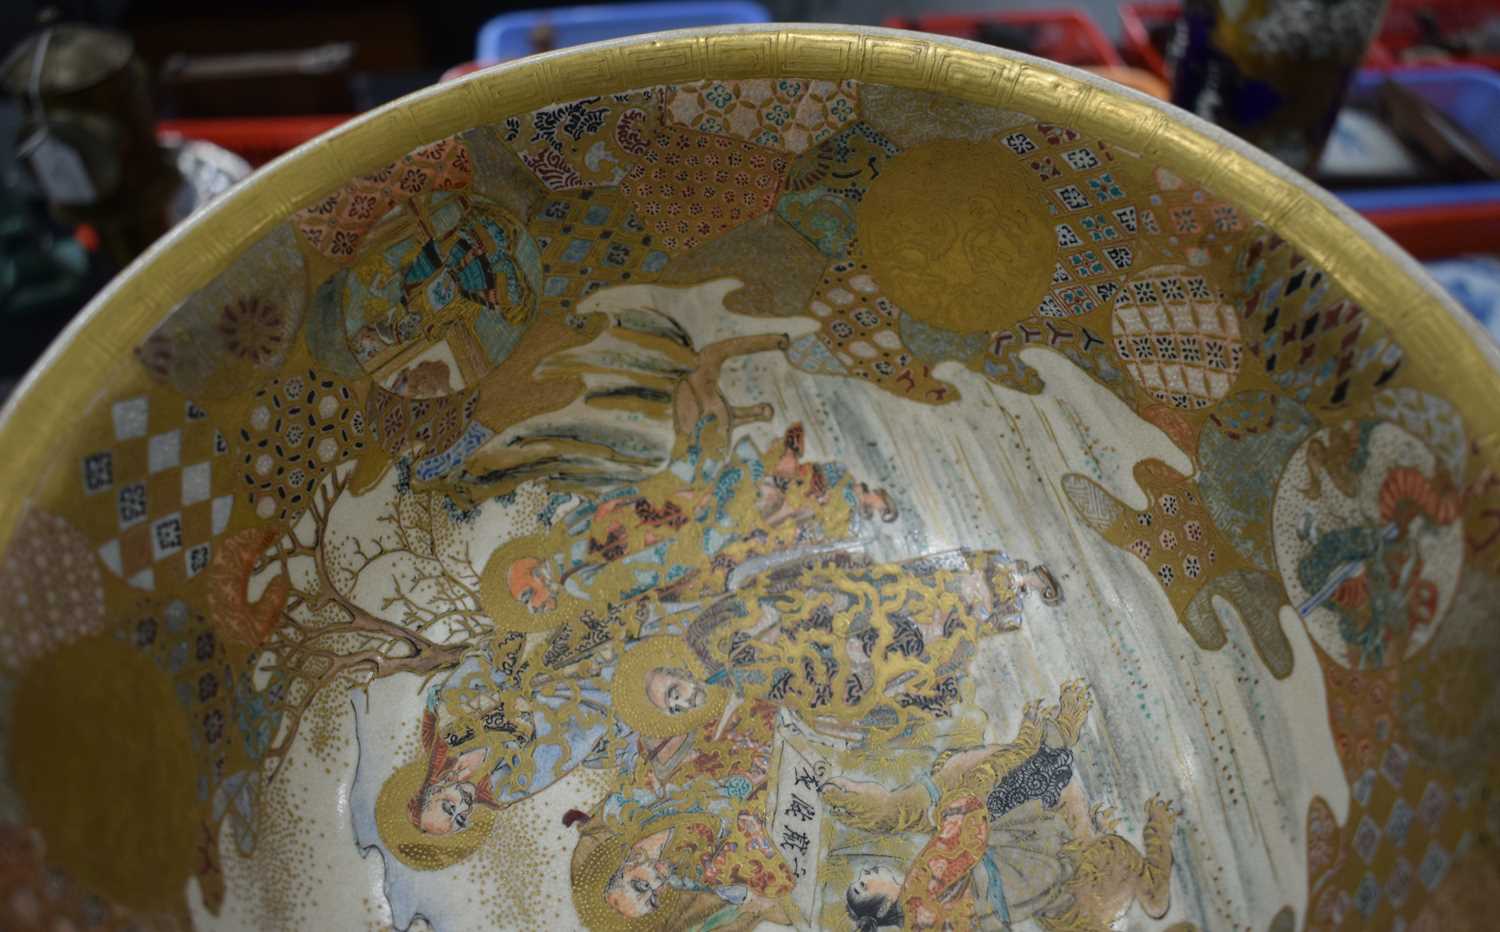 A LARGE 19TH CENTURY JAPANESE MEIJI PERIOD SATSUMA BOWL painted with immortals within landscapes, - Image 12 of 18